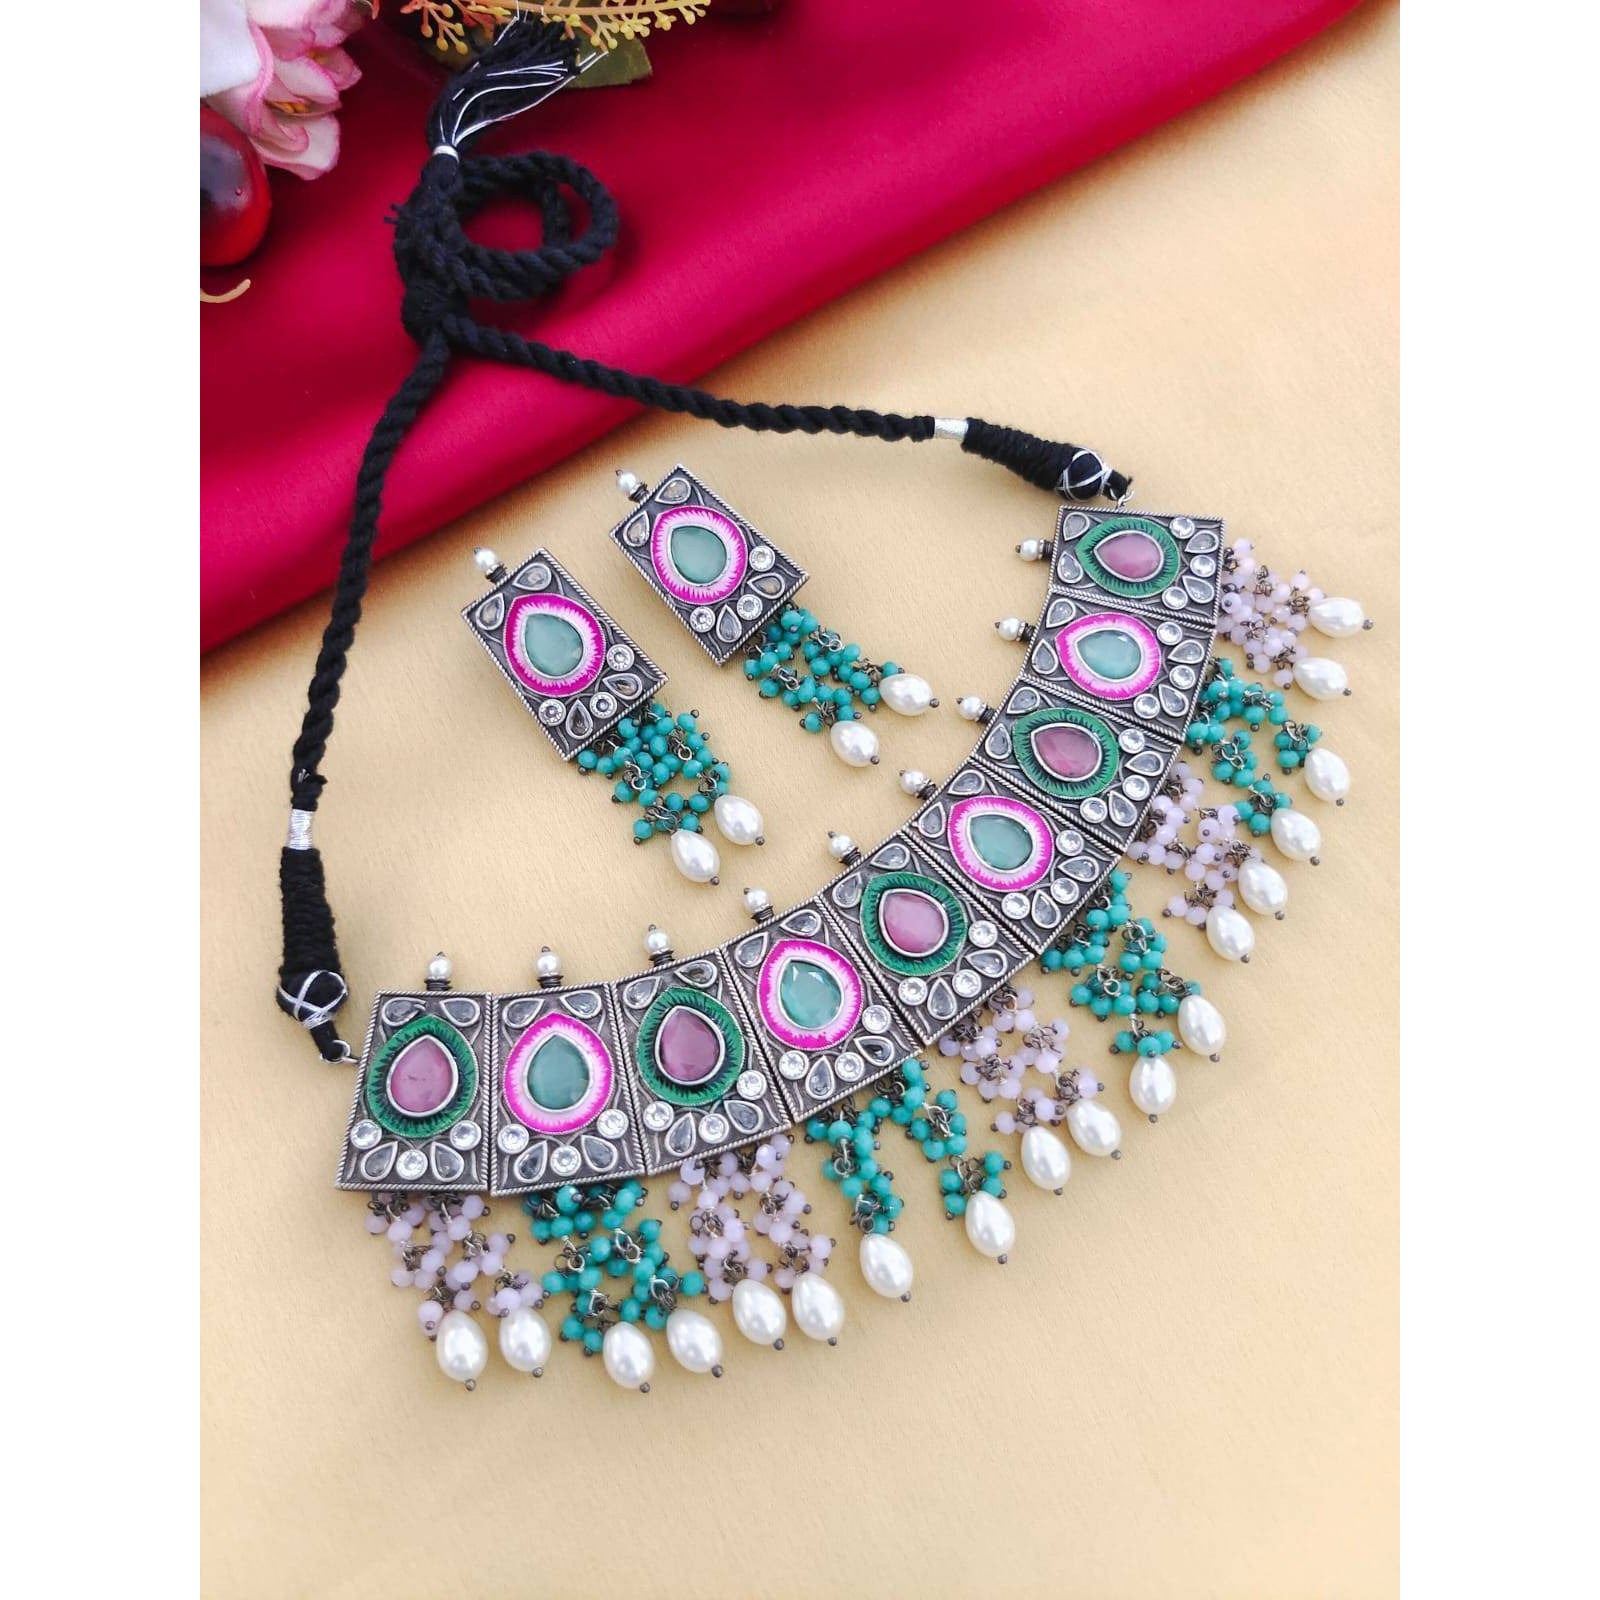 Hand crafted to perfection this dual tone bead necklace is the resplendent image of our design. The three beaded layer of this necklace exquisitely holds the silver and gold colored beads stacked in strings and adds richness and sophistication to the ensemble